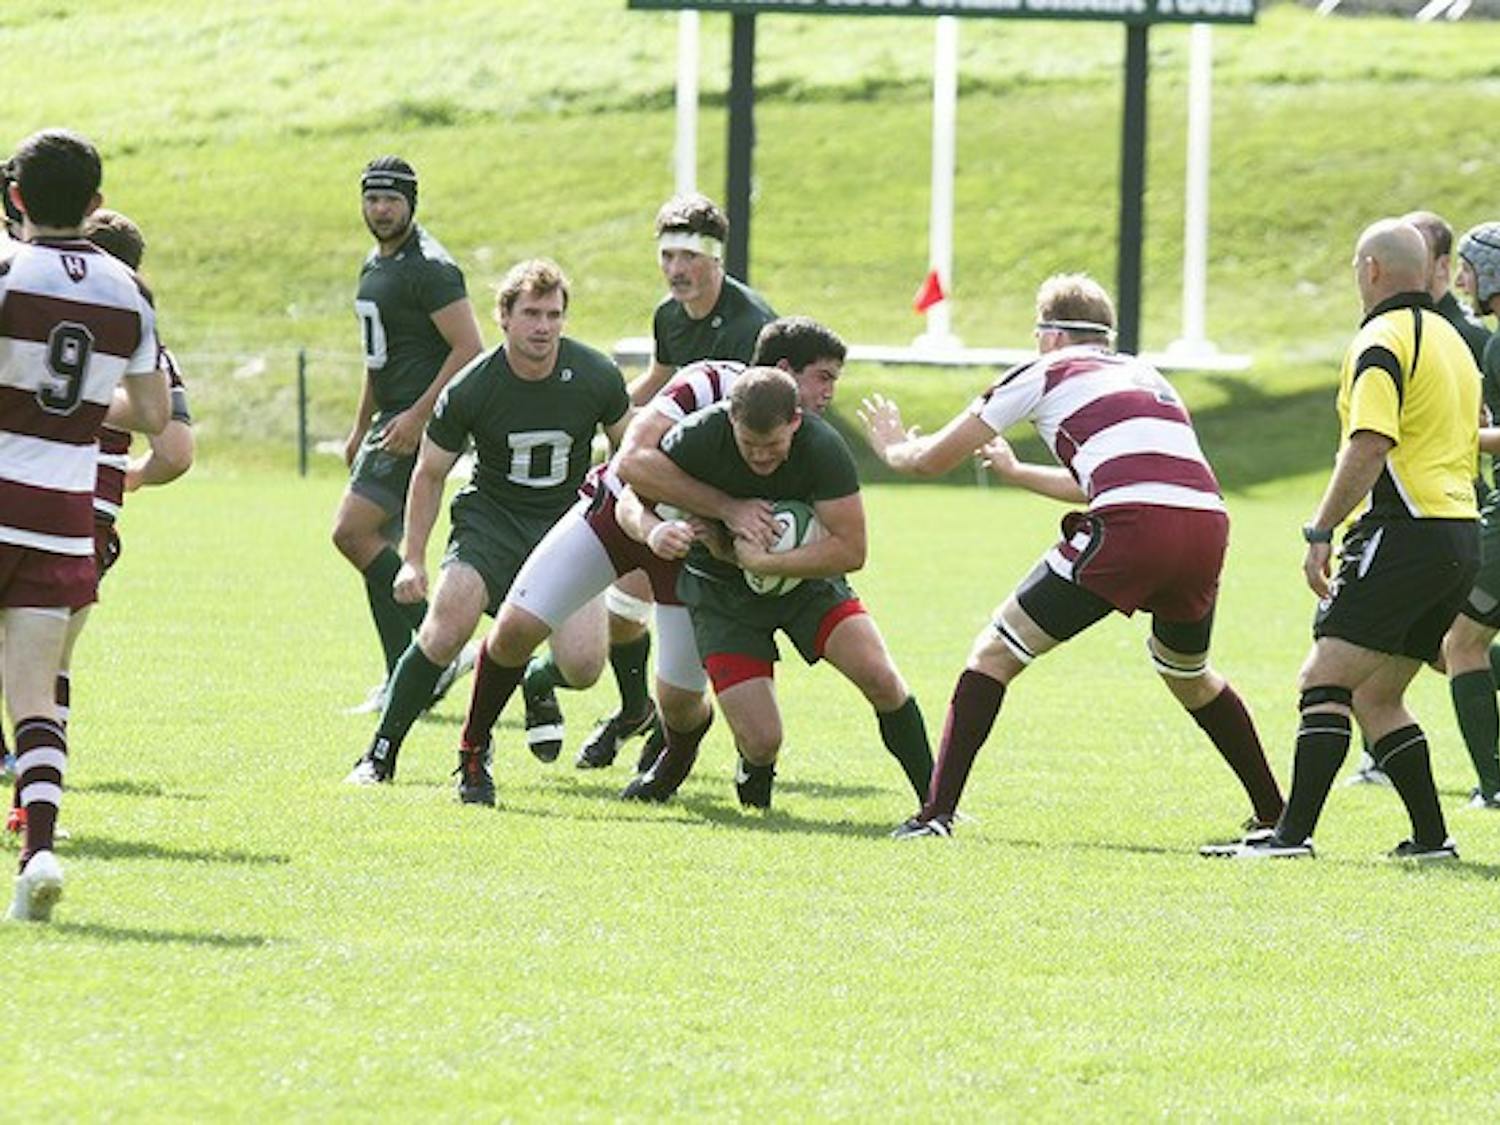 The men's rugby team will face Harvard University in Cambridge, Mass., on Saturday.